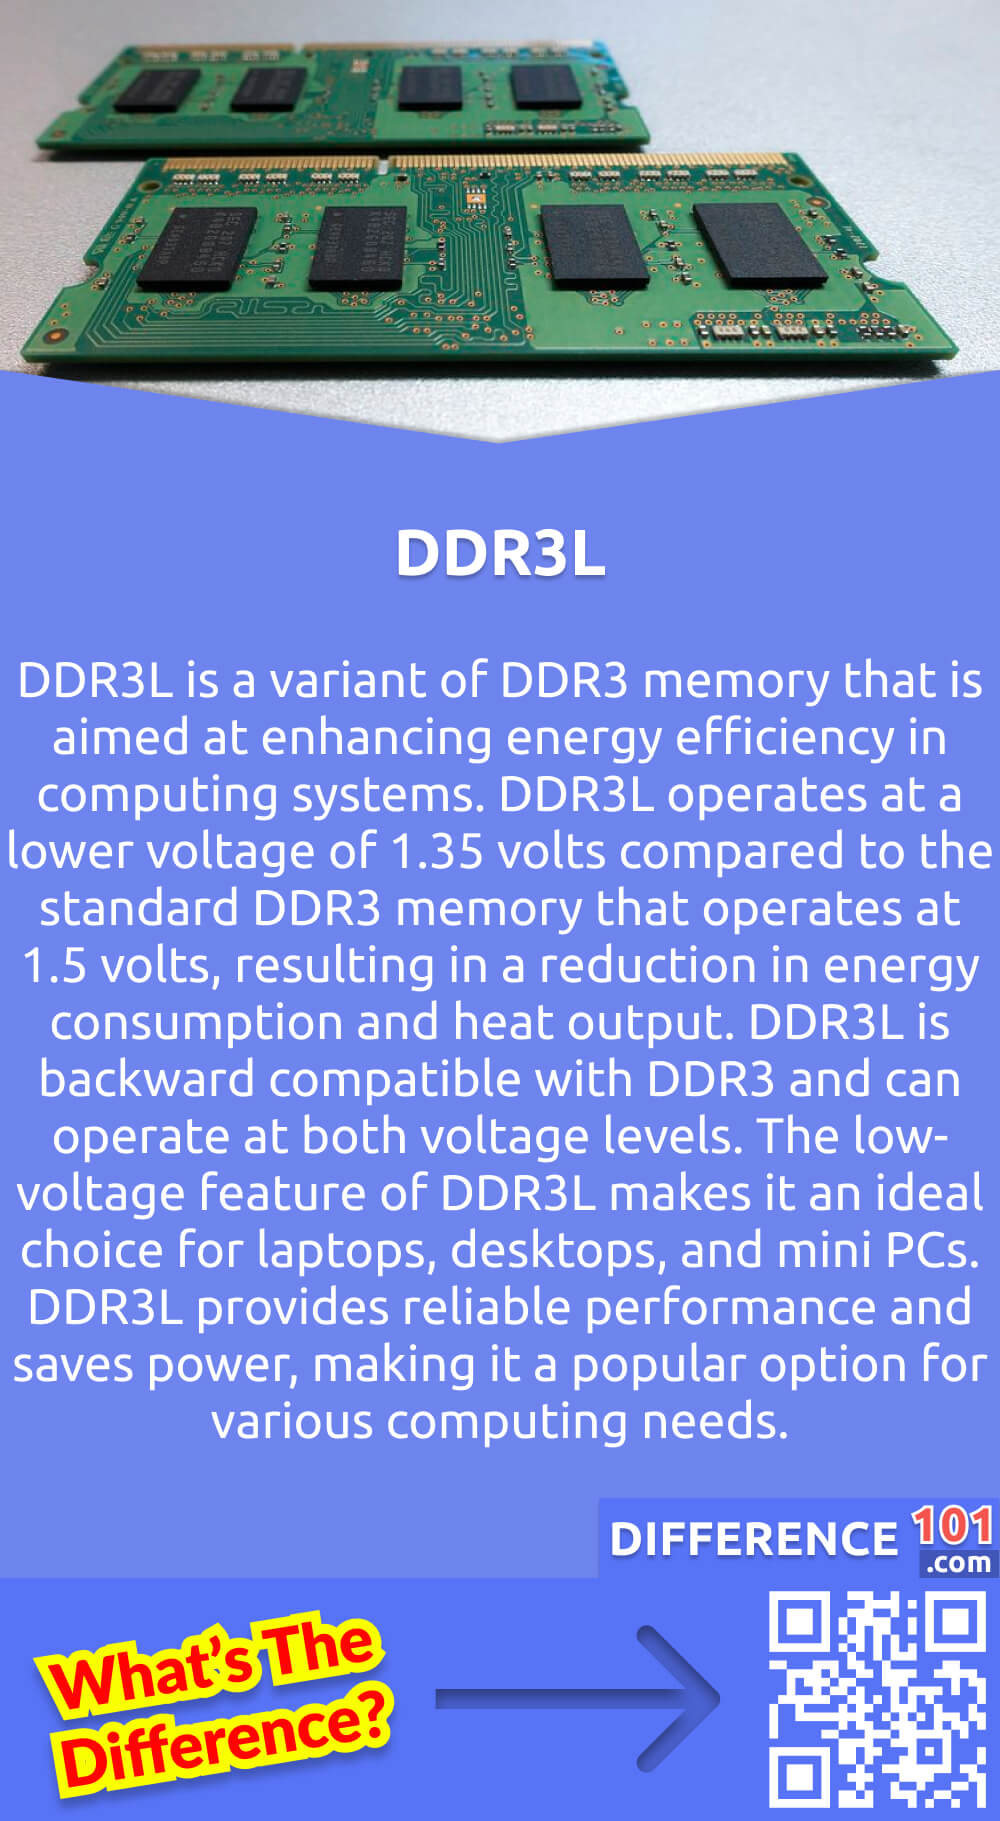 What Is DDR3L? DDR3L is a variant of DDR3 memory that is aimed at enhancing energy efficiency in computing systems. DDR3L operates at a lower voltage of 1.35 volts compared to the standard DDR3 memory that operates at 1.5 volts, resulting in a reduction in energy consumption and heat output. DDR3L is backward compatible with DDR3 and can operate at both voltage levels. The low-voltage feature of DDR3L makes it an ideal choice for laptops, desktops, and mini PCs, especially those that prioritize energy efficiency and low power consumption, such as portable devices that rely on battery power. DDR3L provides reliable performance and saves power, making it a popular option for various computing needs.